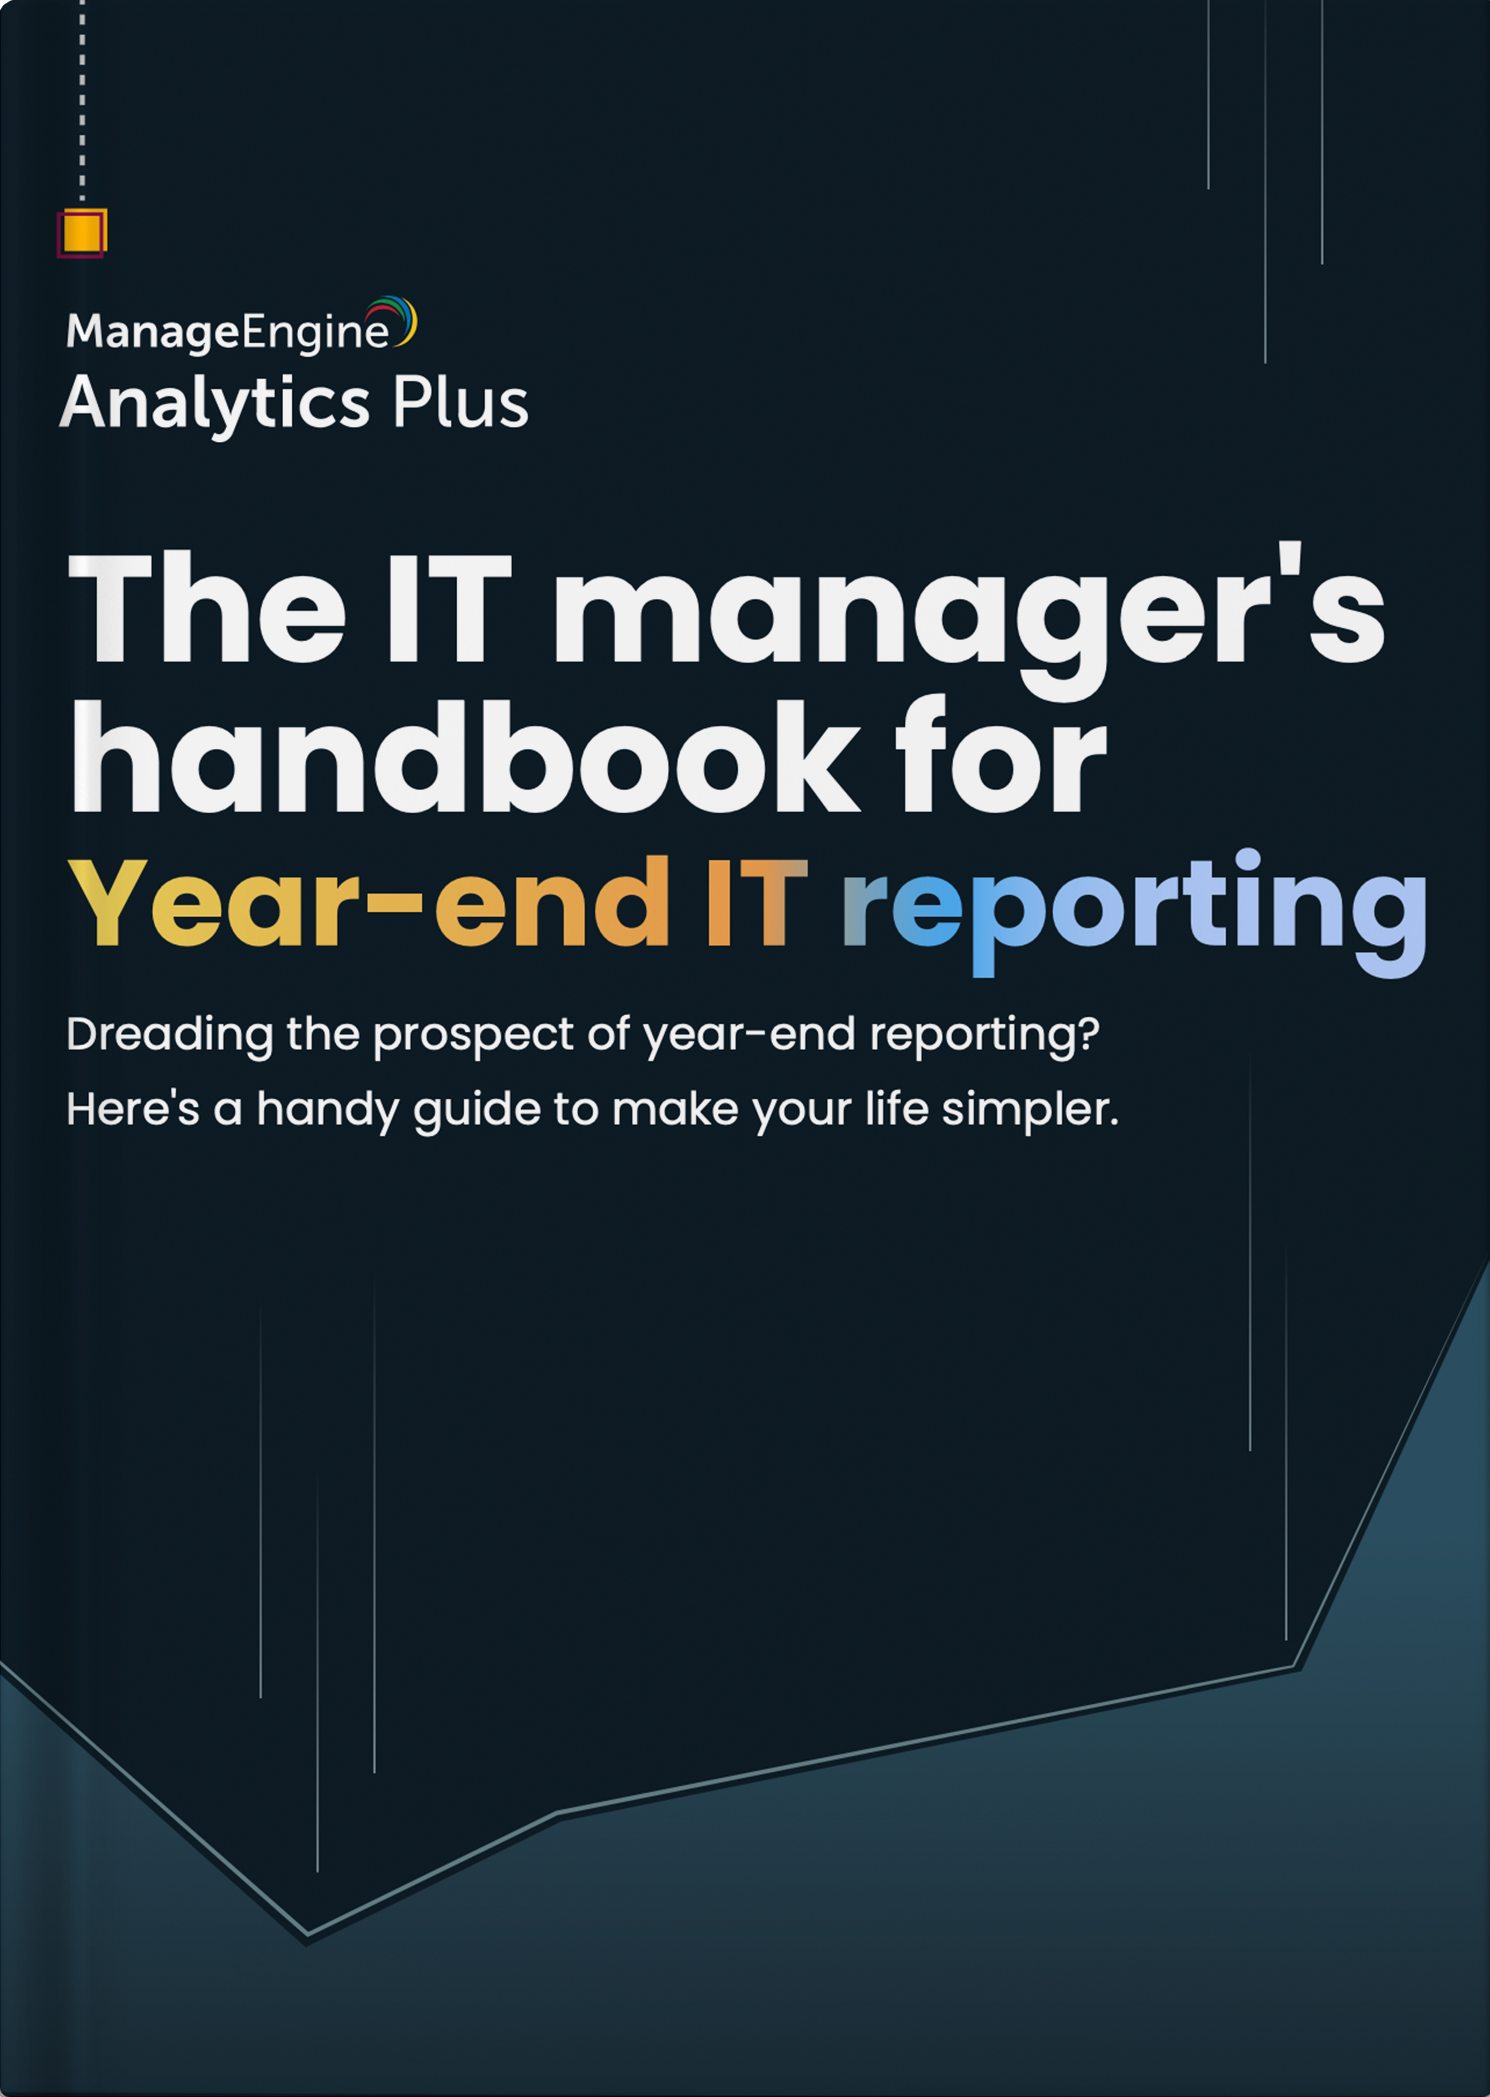 The IT managers' handbook for year-end IT reporting